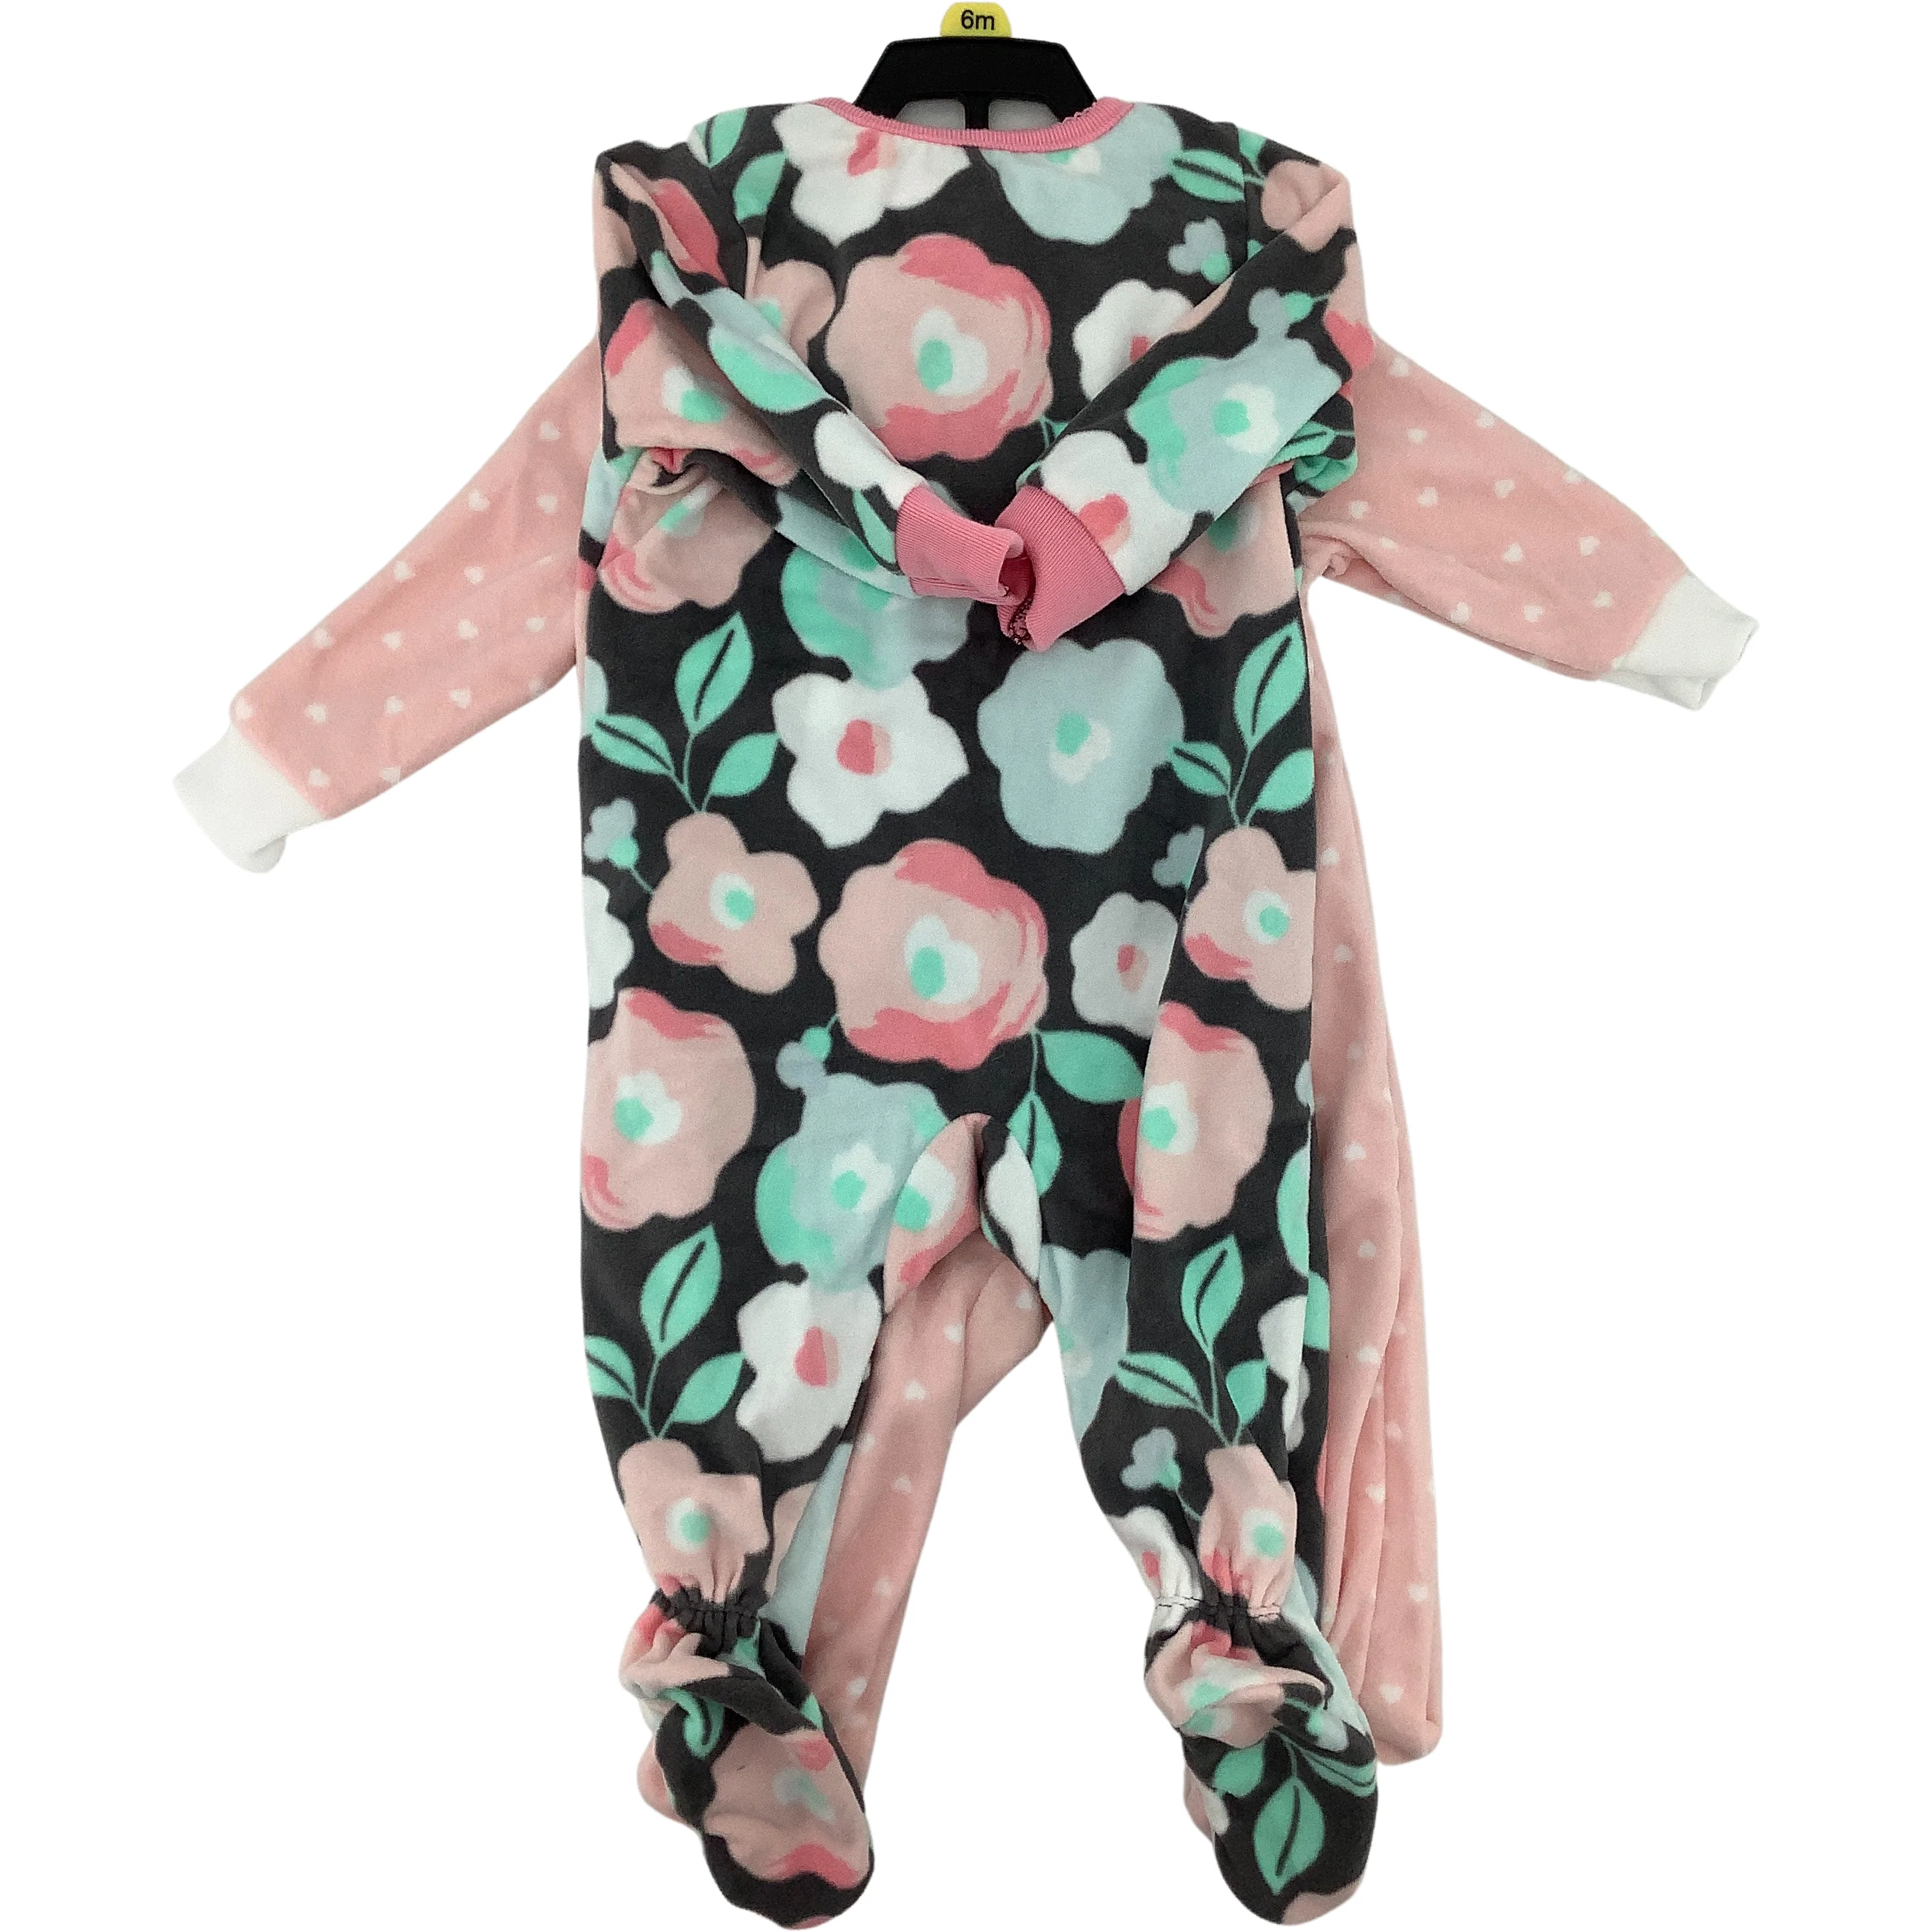 Carter's Infant Girl's One Piece Sleeper / 2 Piece Set / Infant Pyjamas / Size 6 Months **No Tags**